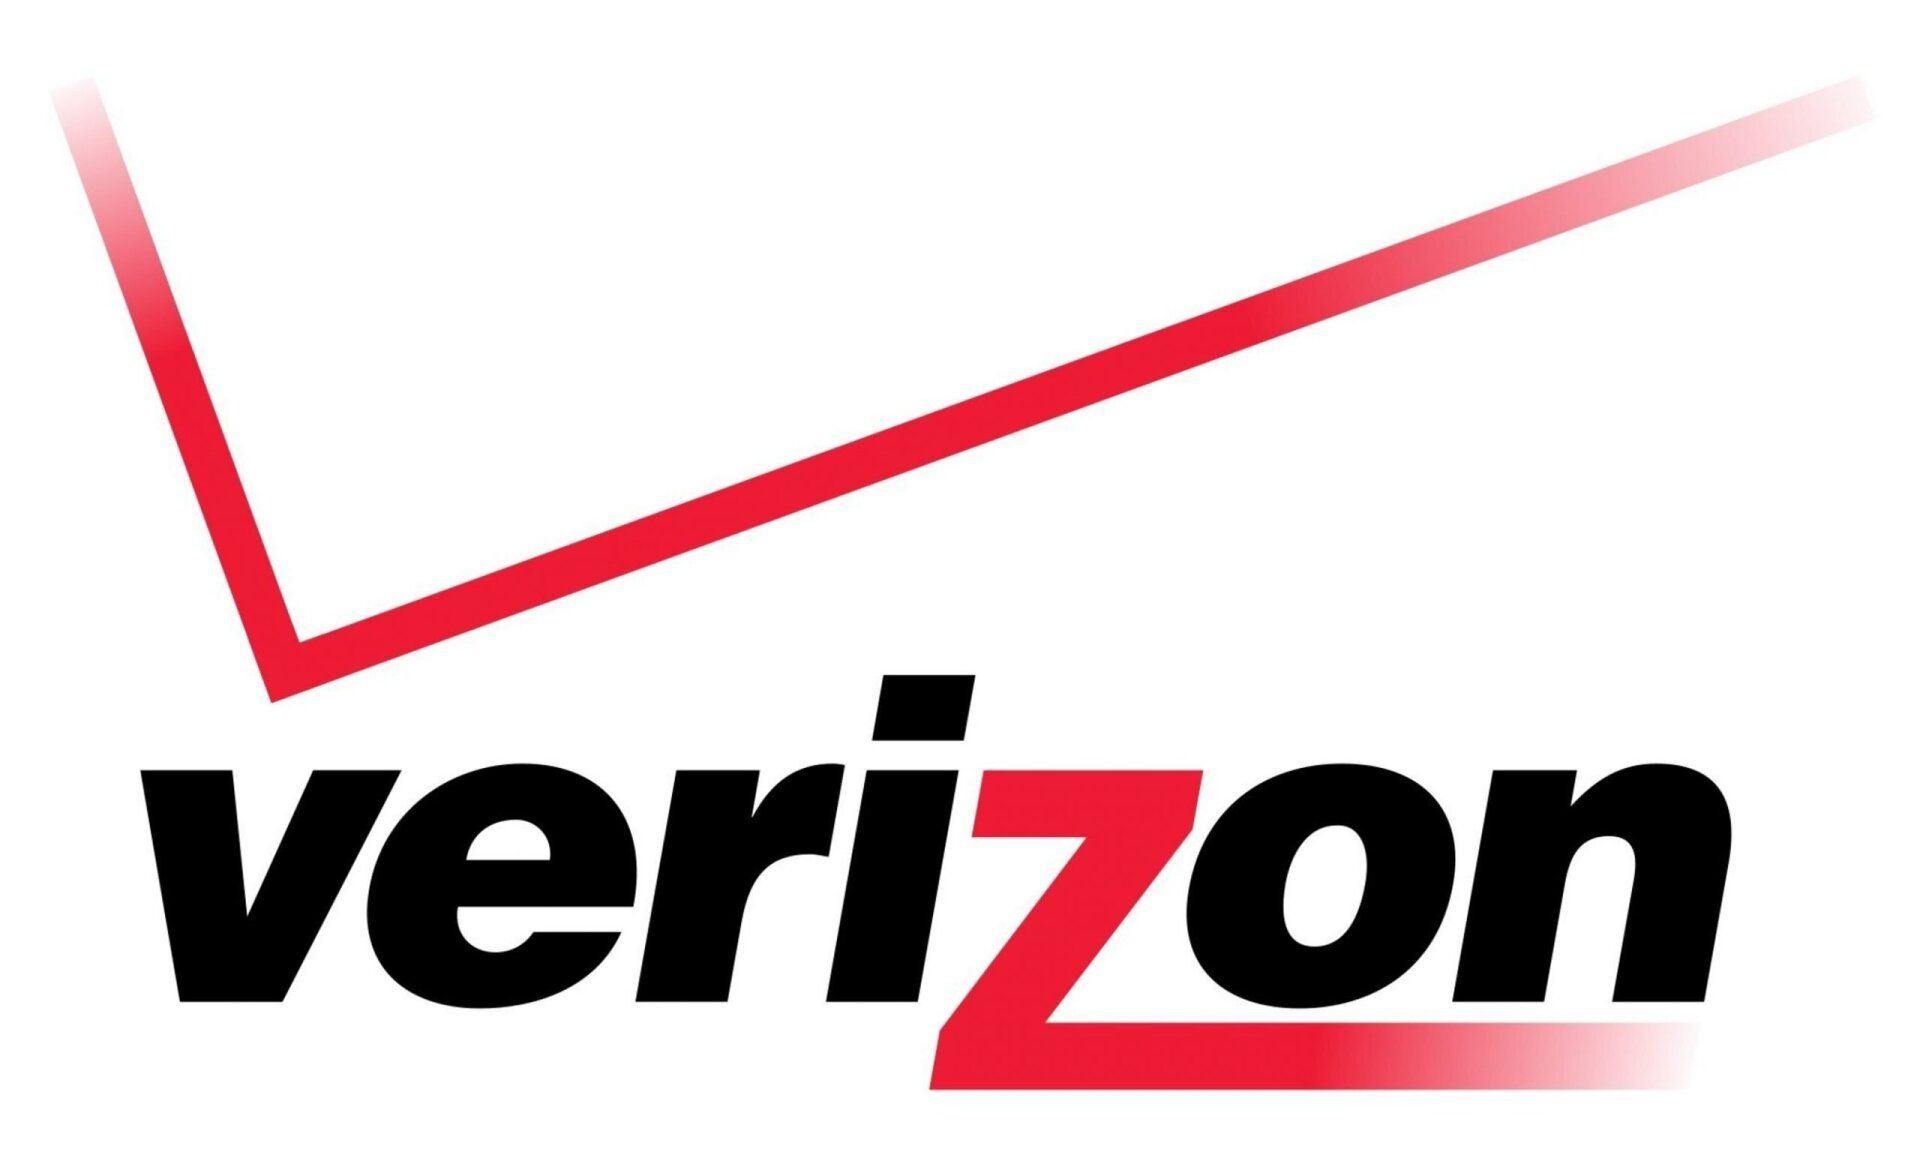 A verizon logo with a red arrow on a white background